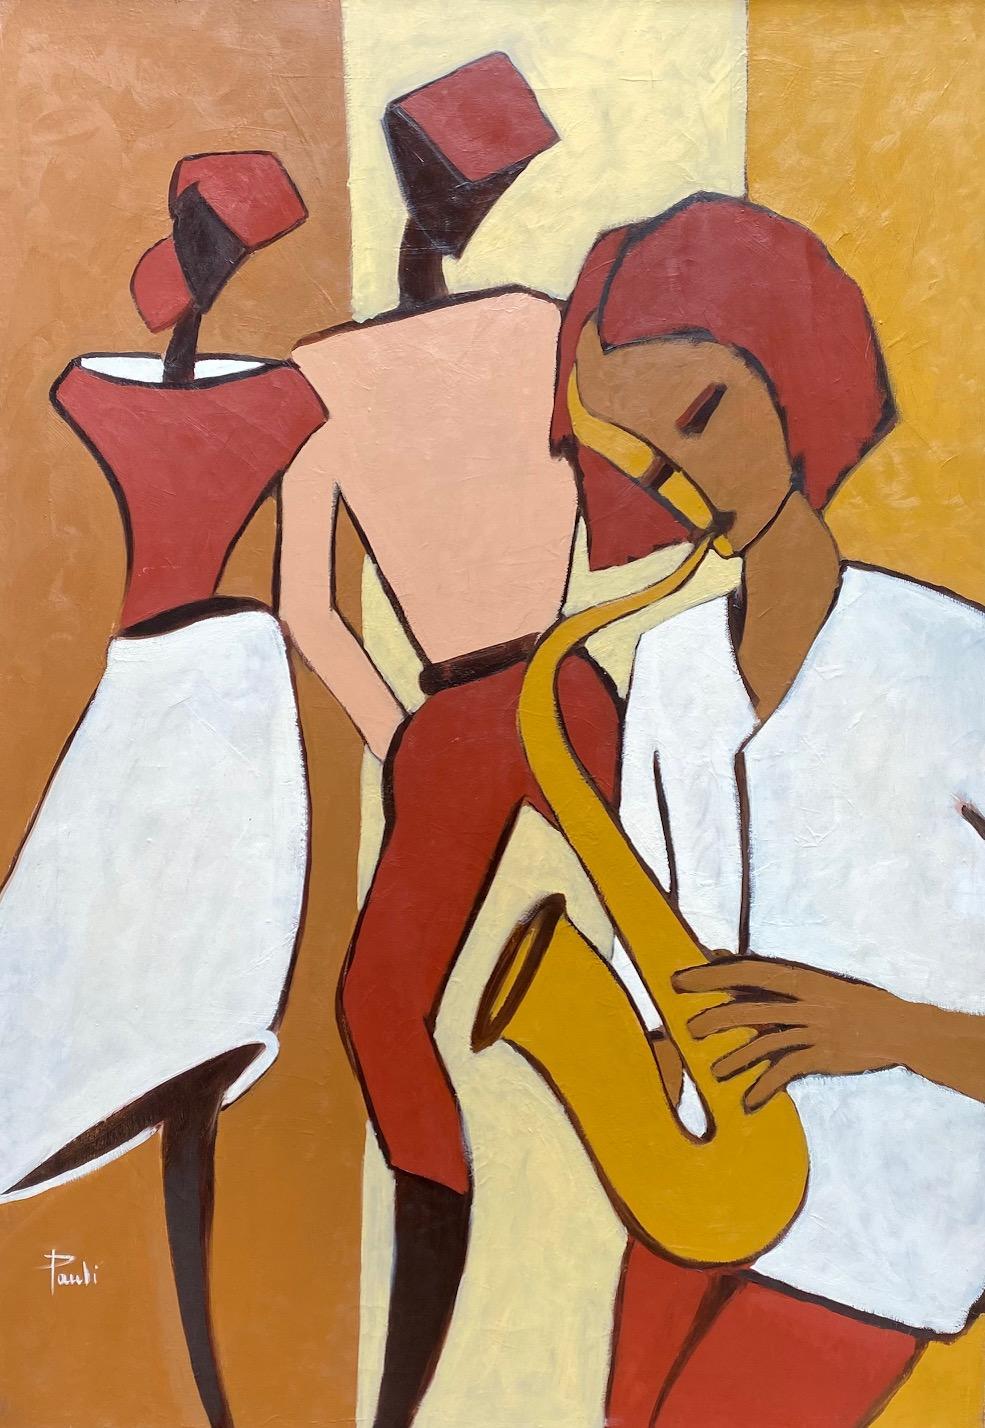 The Saxophonist by Gilbert Pauli - Oil paint on canvas 98x65 cm